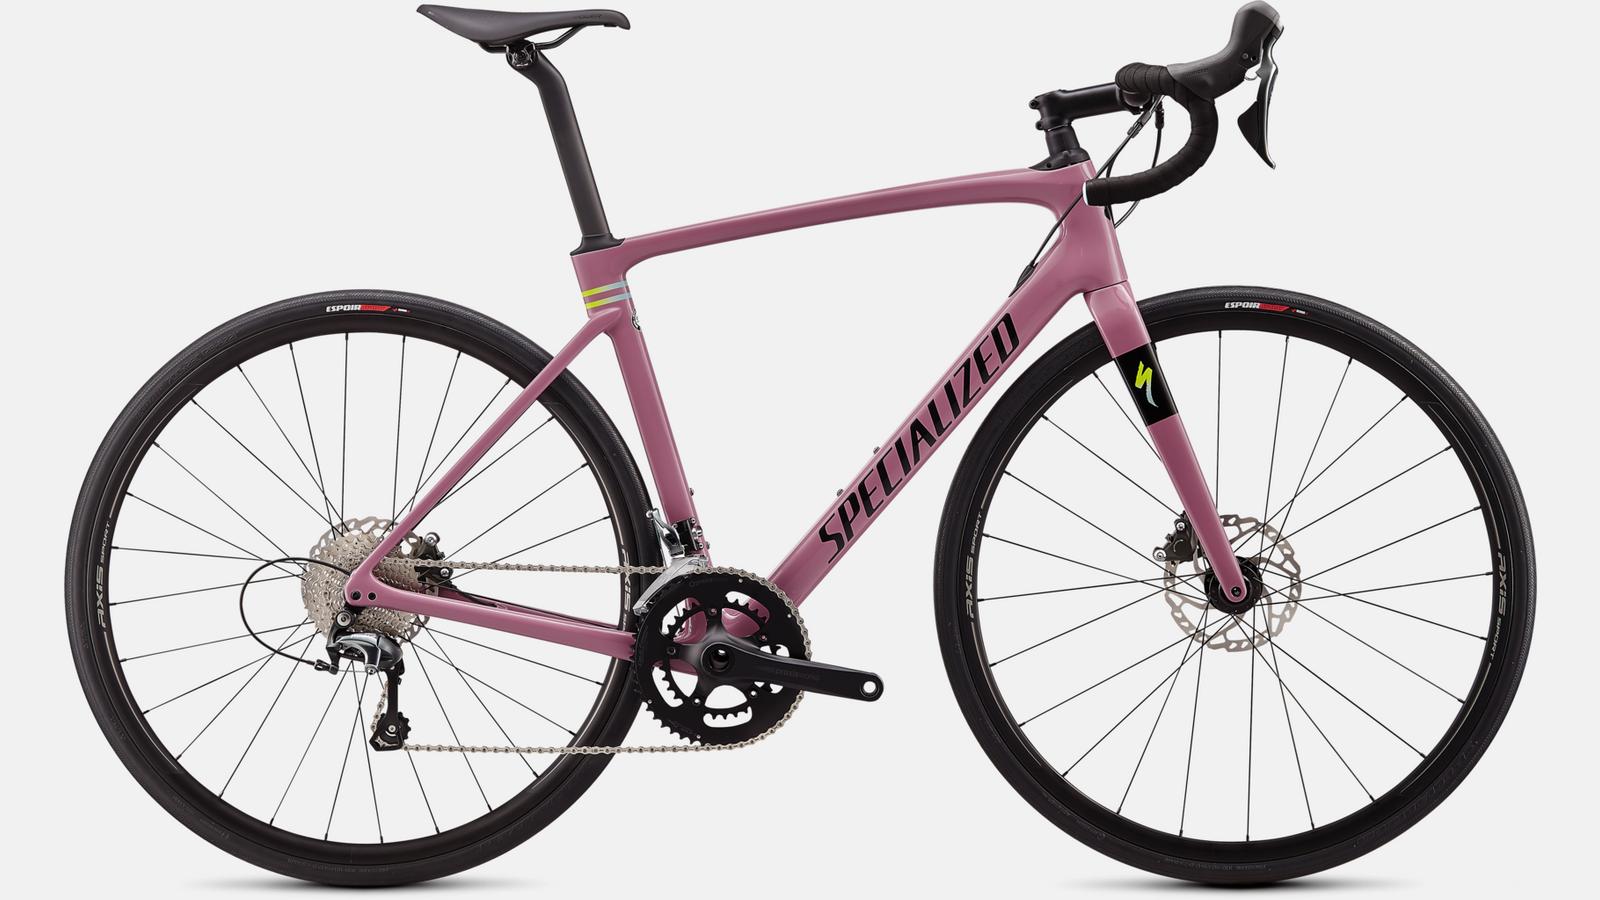 Paint for 2020 Specialized Roubaix - Gloss Dusty Lilac